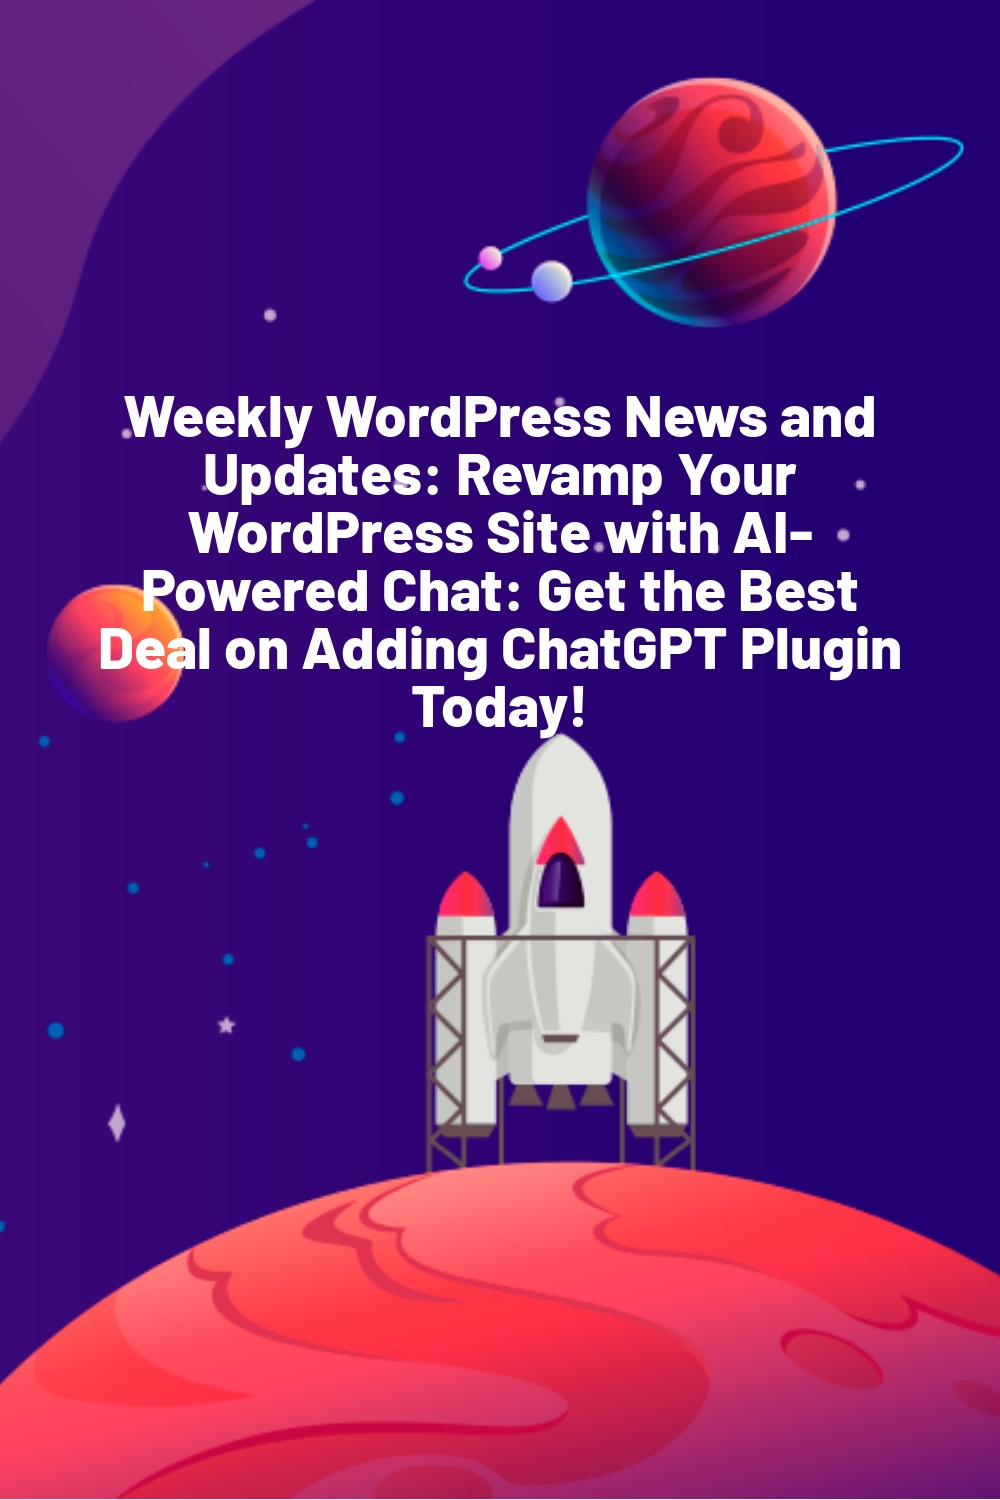 Weekly WordPress News and Updates: Revamp Your WordPress Site with AI-Powered Chat: Get the Best Deal on Adding ChatGPT Plugin Today!